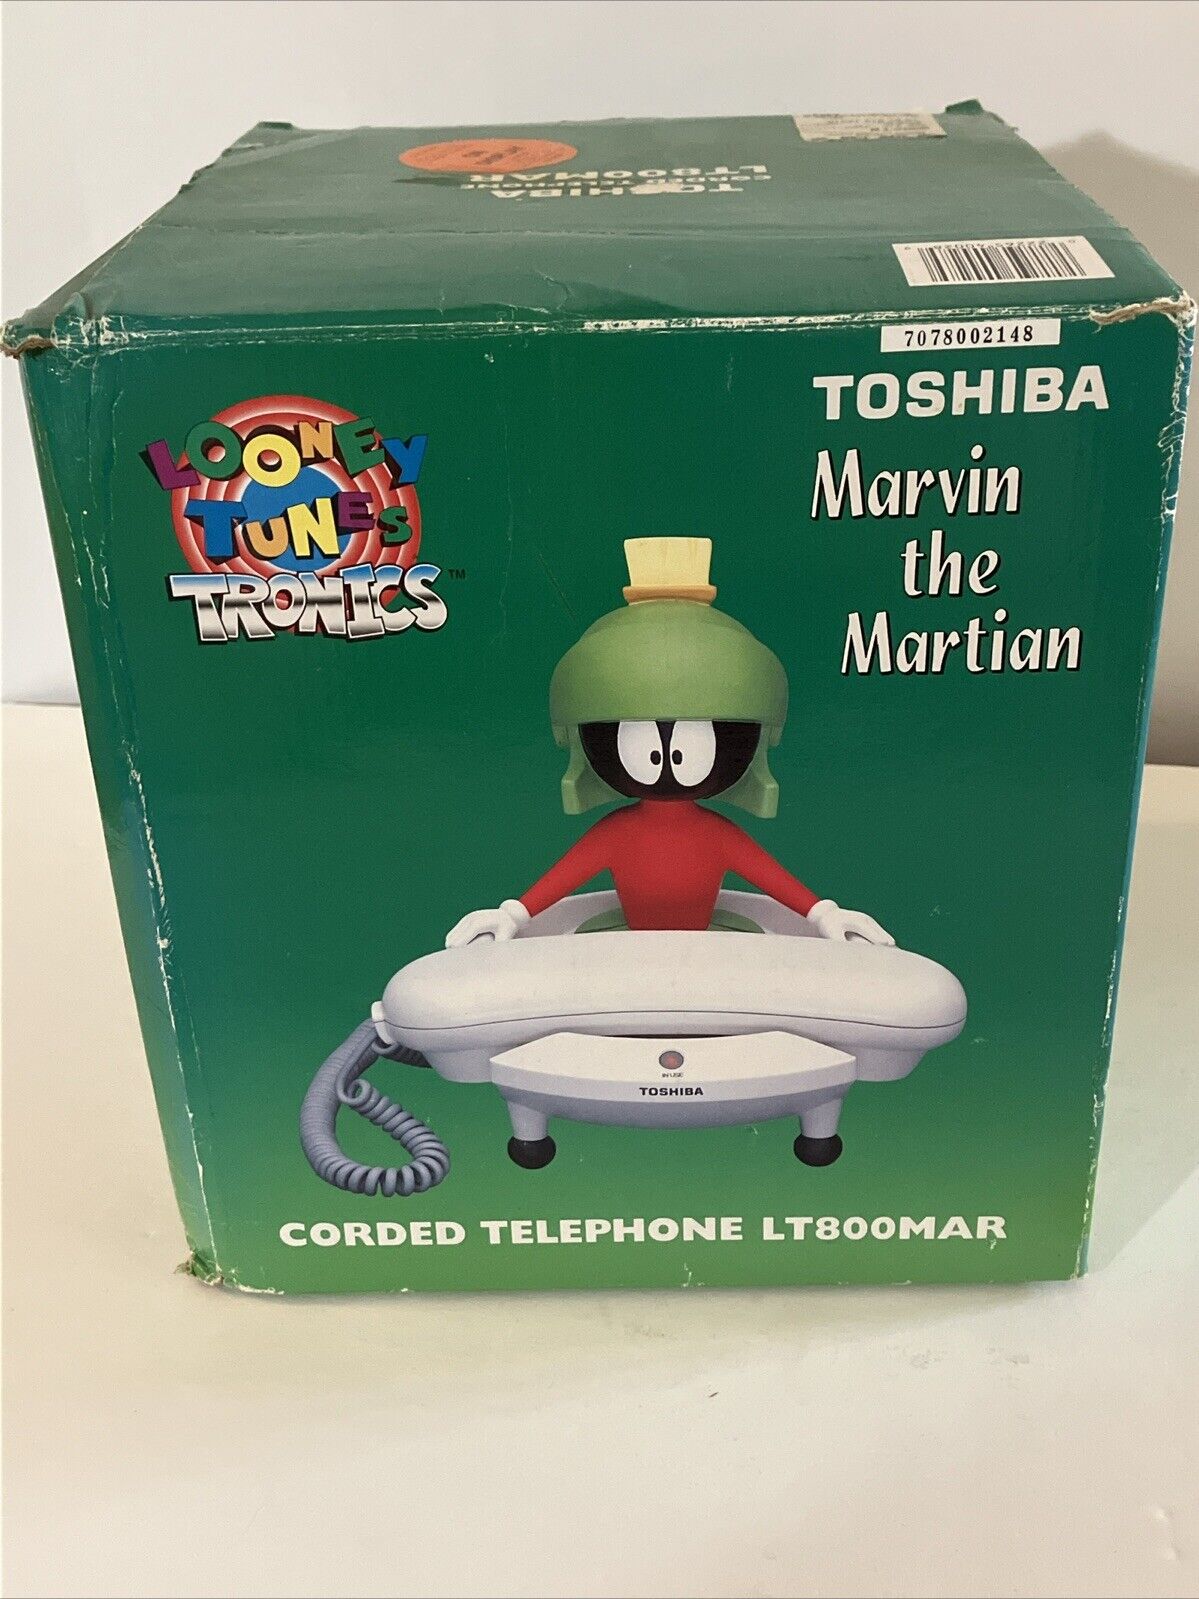 Vintage-1997 Marvin The Martian Toshiba Corded Telephone-, by Looney TuneTronics